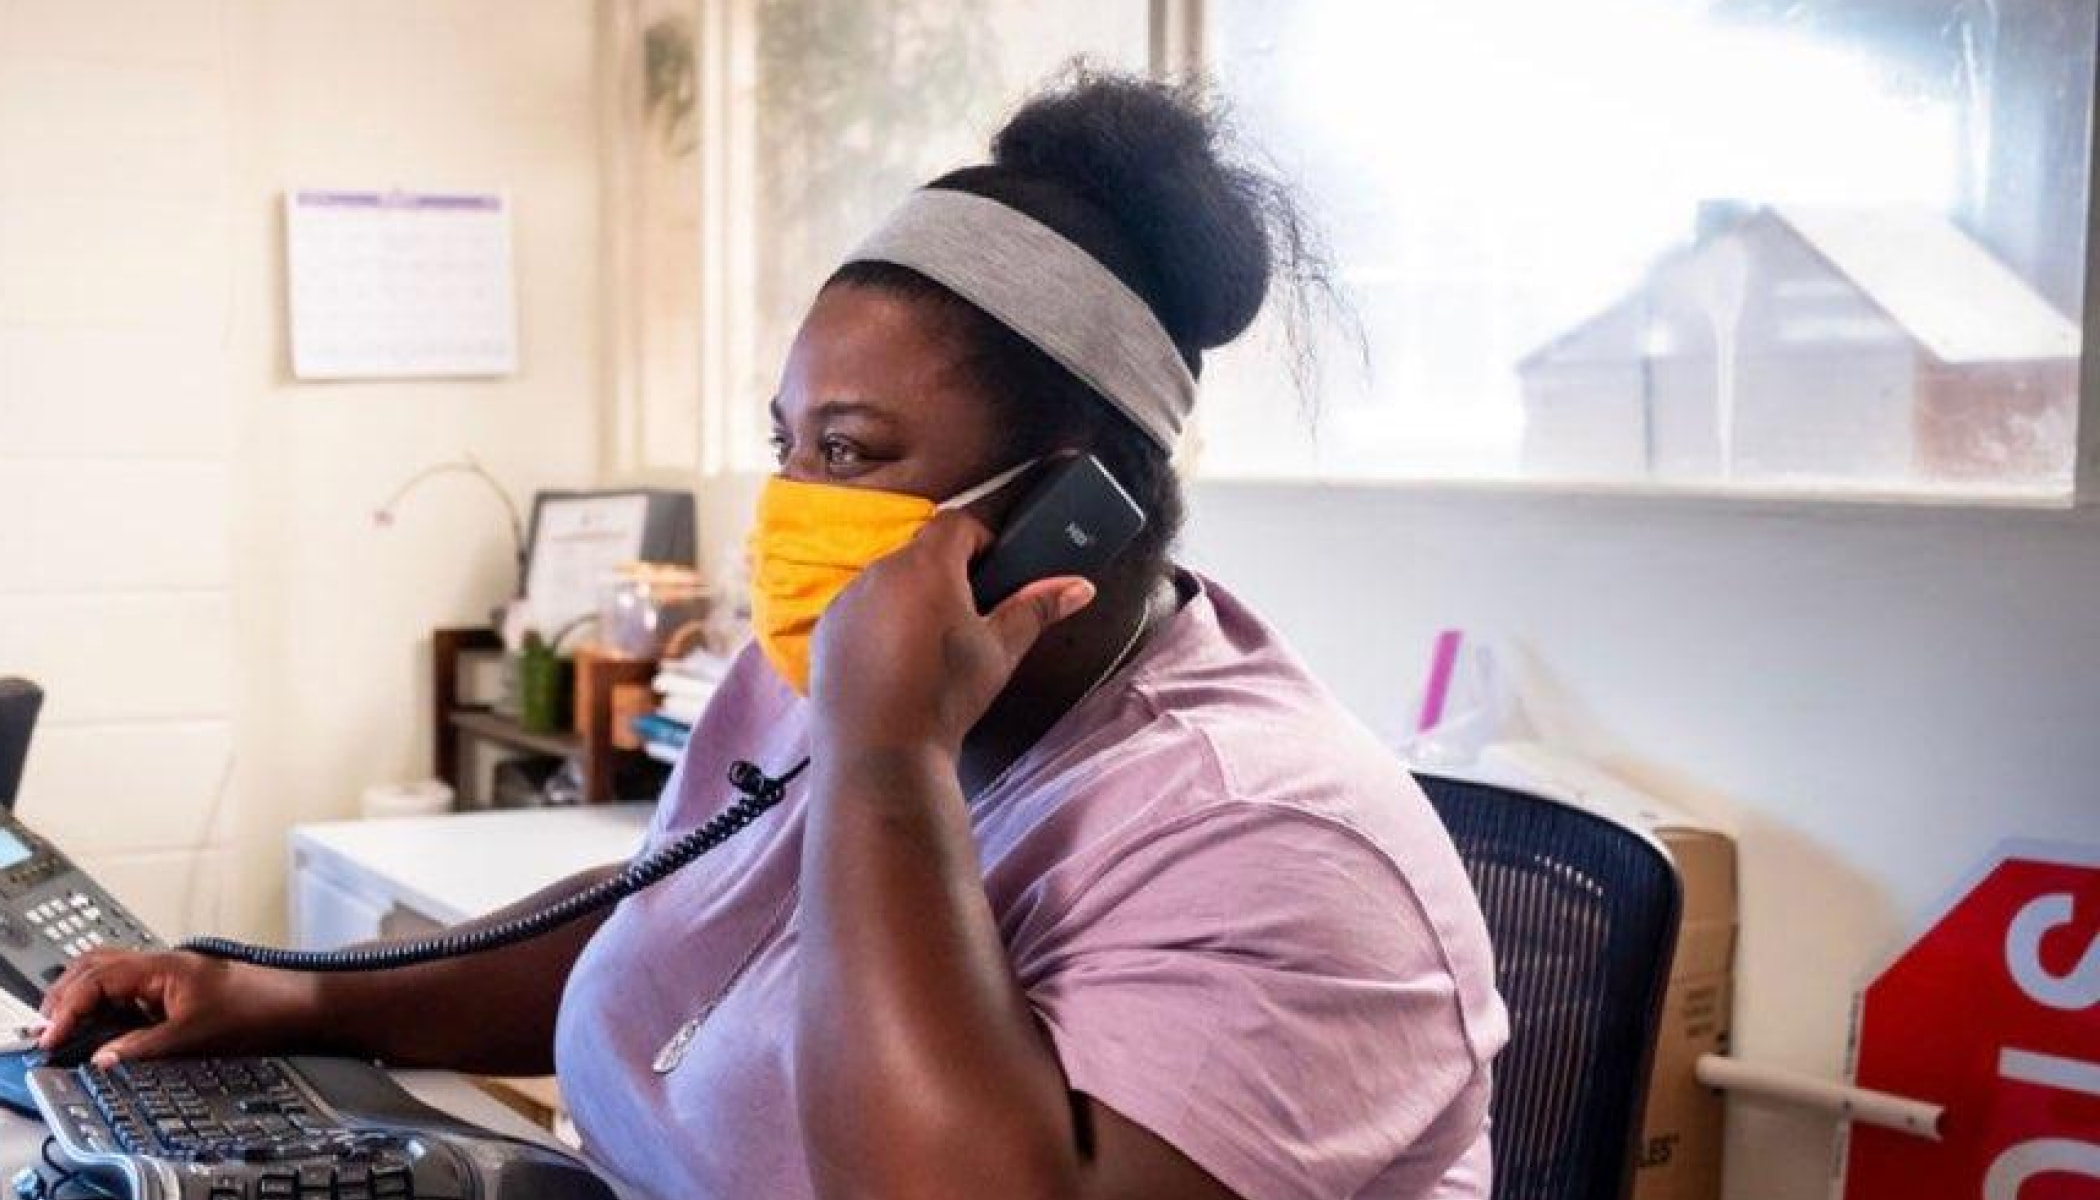 LaKesha Roberts wears a mask while talking on the phone and working at a desk.